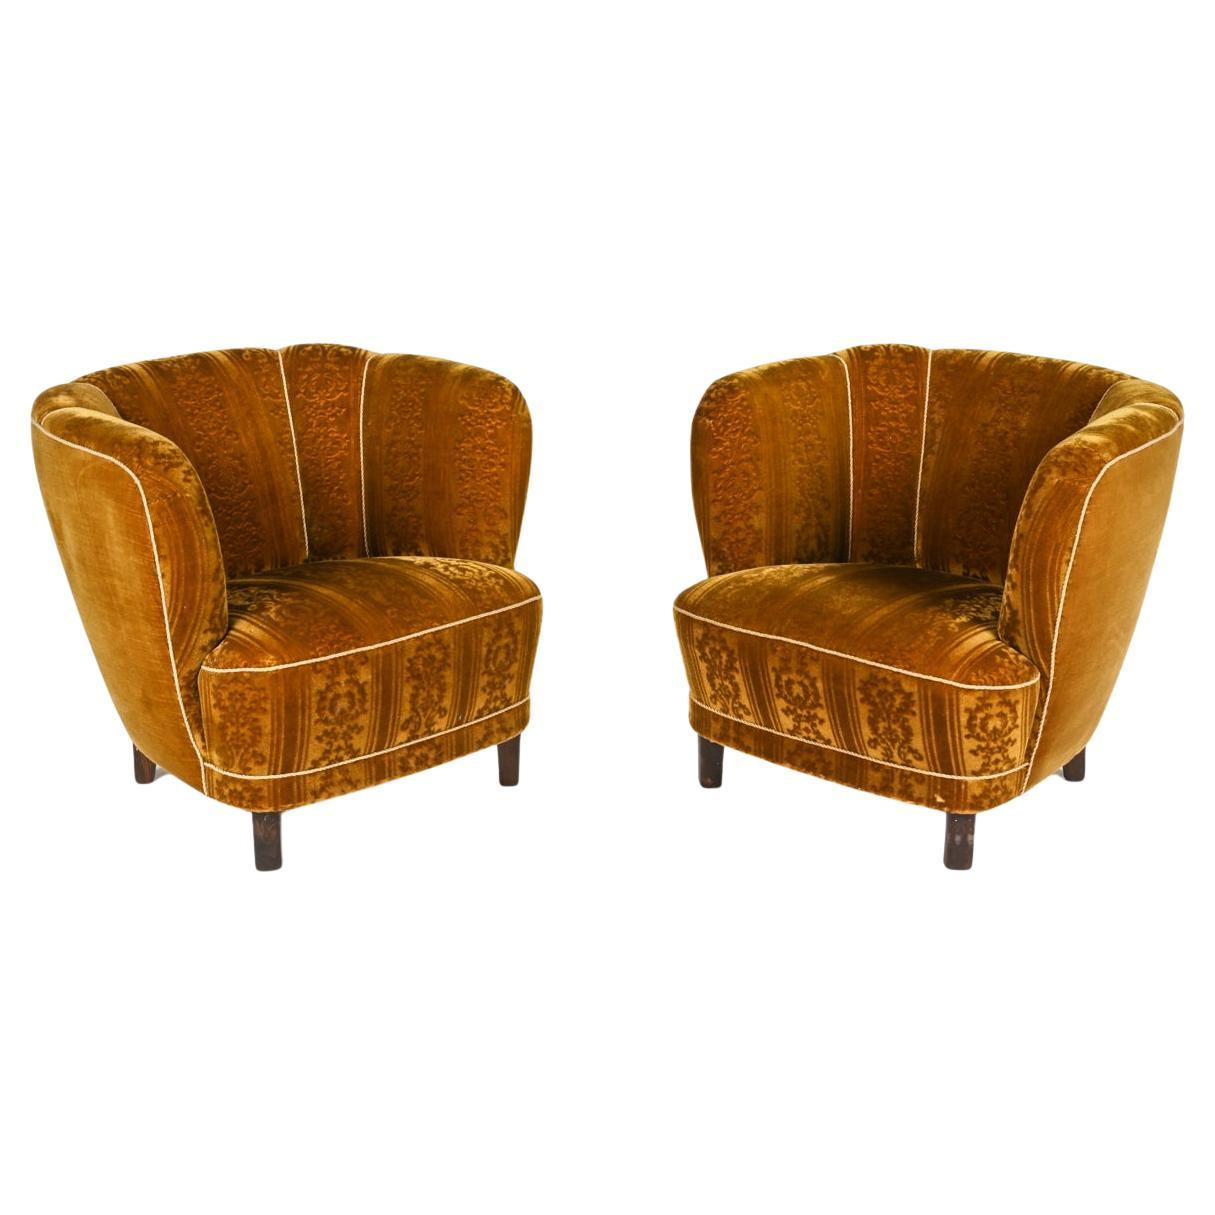 Pair of Manner of Viggo Boesen Lounge Chairs by Slagelse, c. 1940's